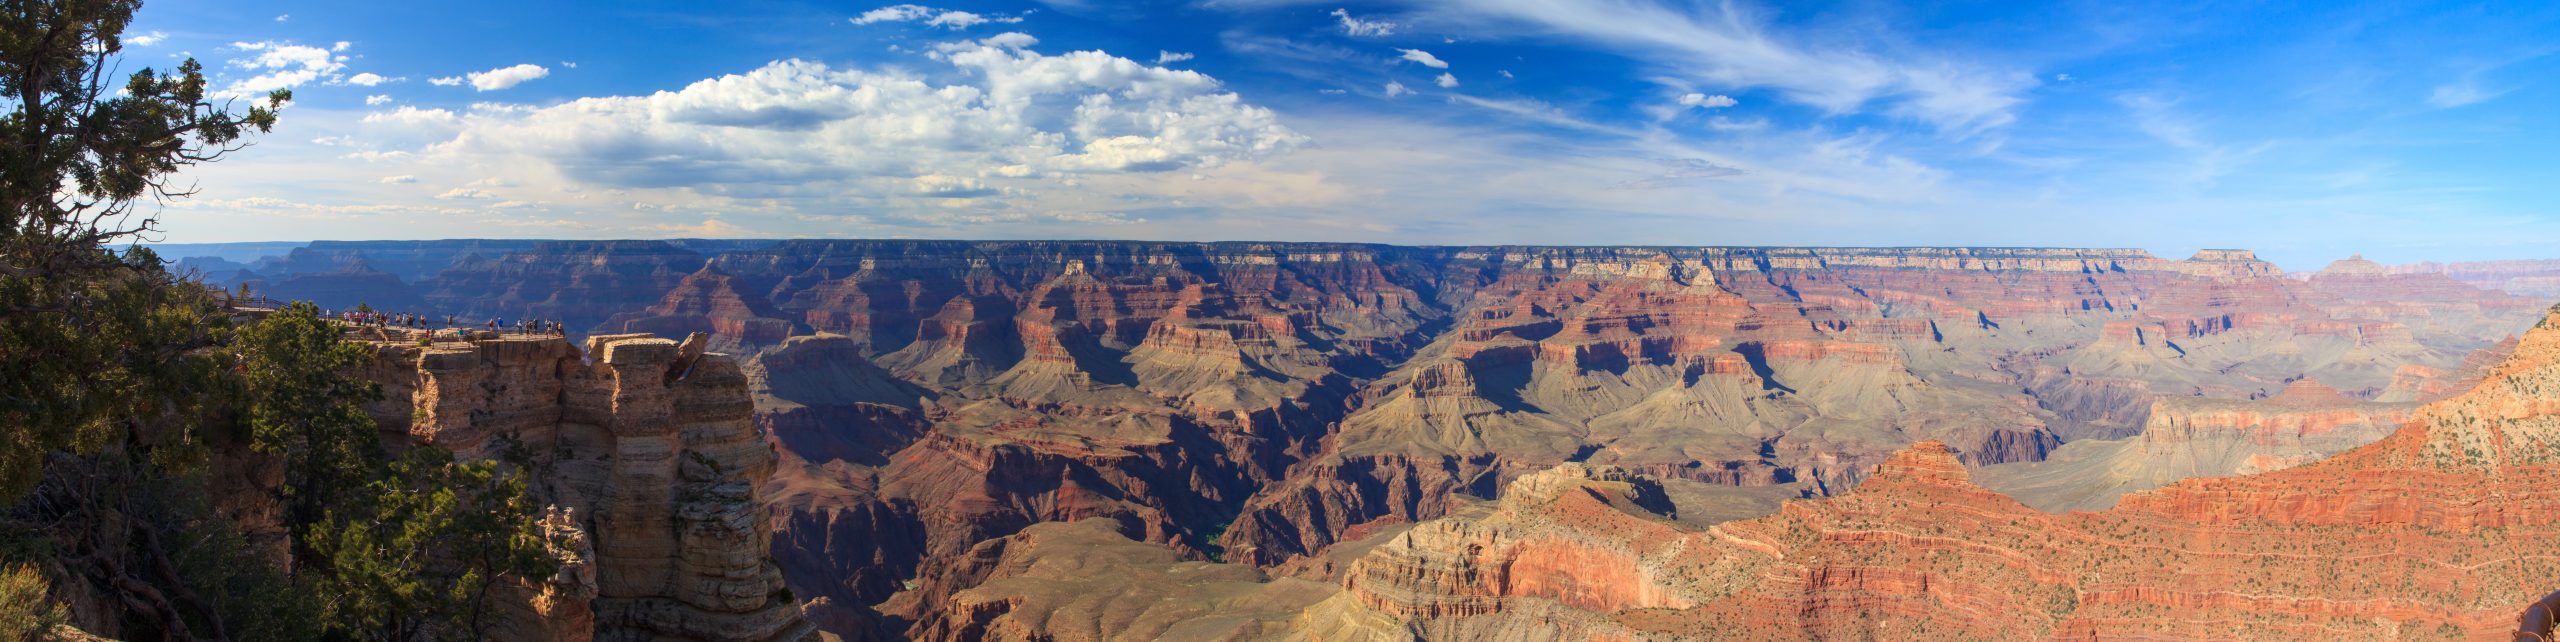 Wide-angle view overlooking the Grand Canyon, in which you can see continuous flat-lying layers of white, tan, and gray sedimentary rock along the canyon walls.